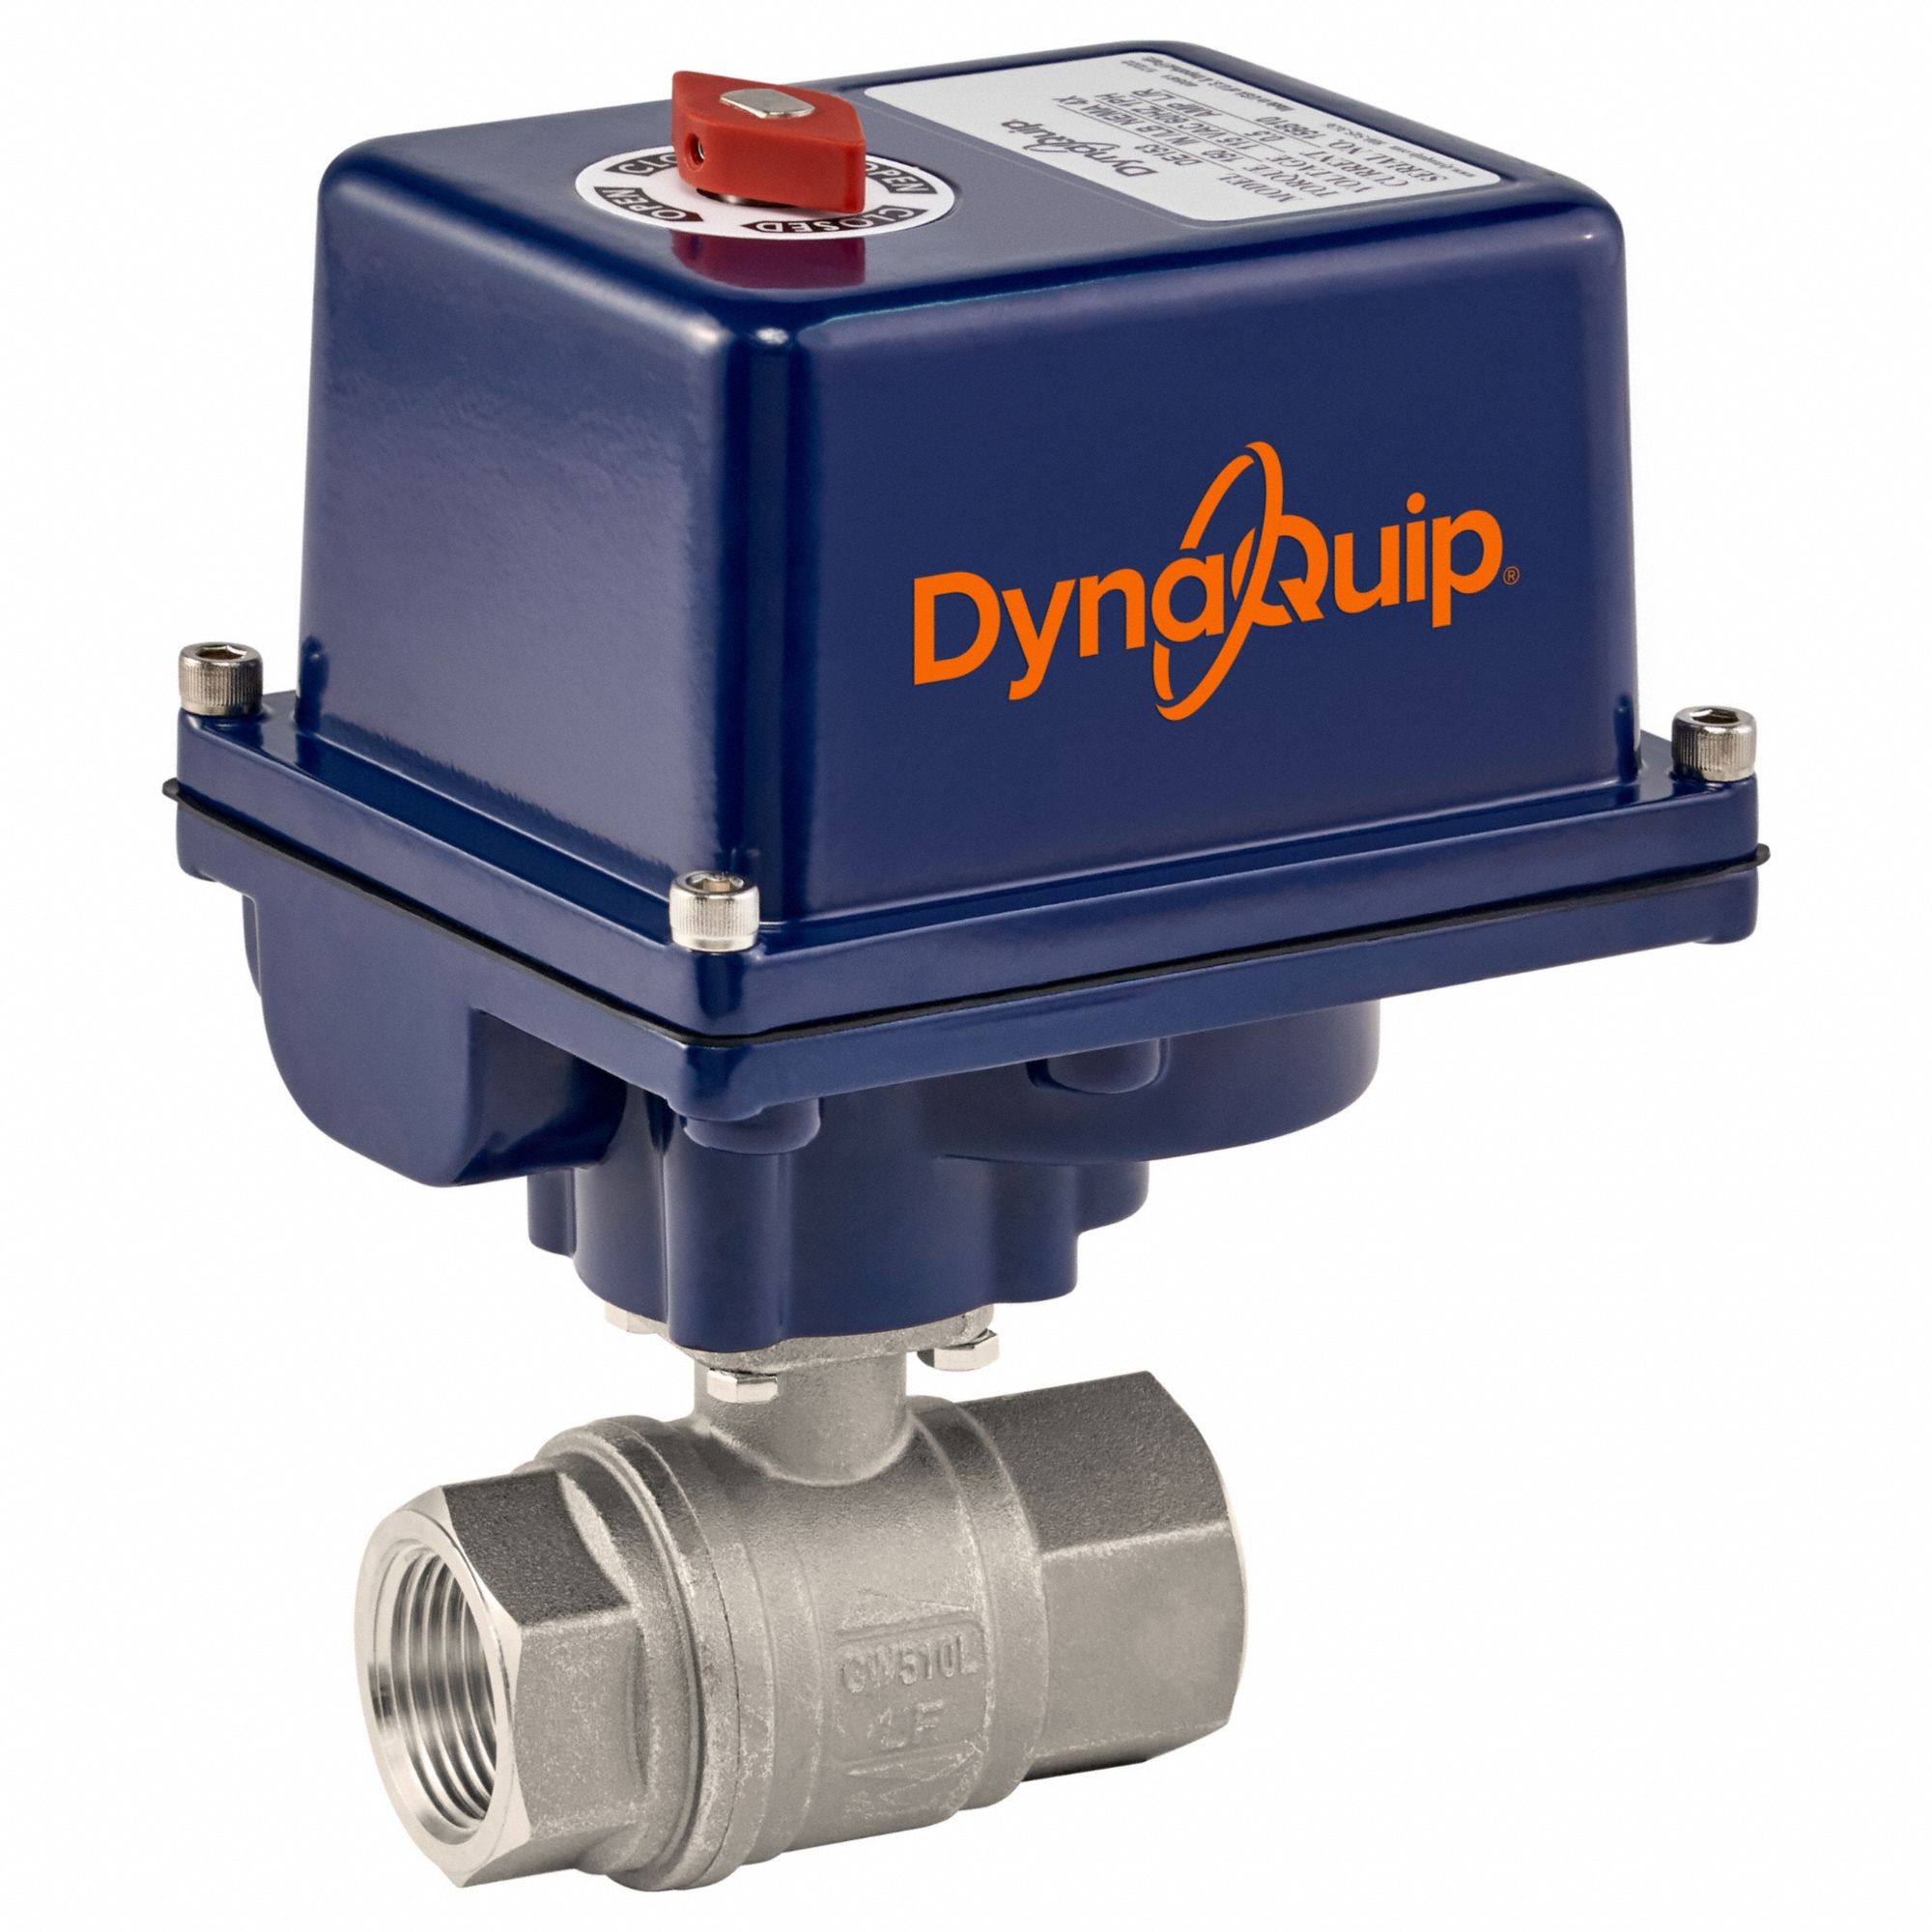 DYNAQUIP CONTROLS E2S25AJE21 Electronic Ball ValveSS1 In.